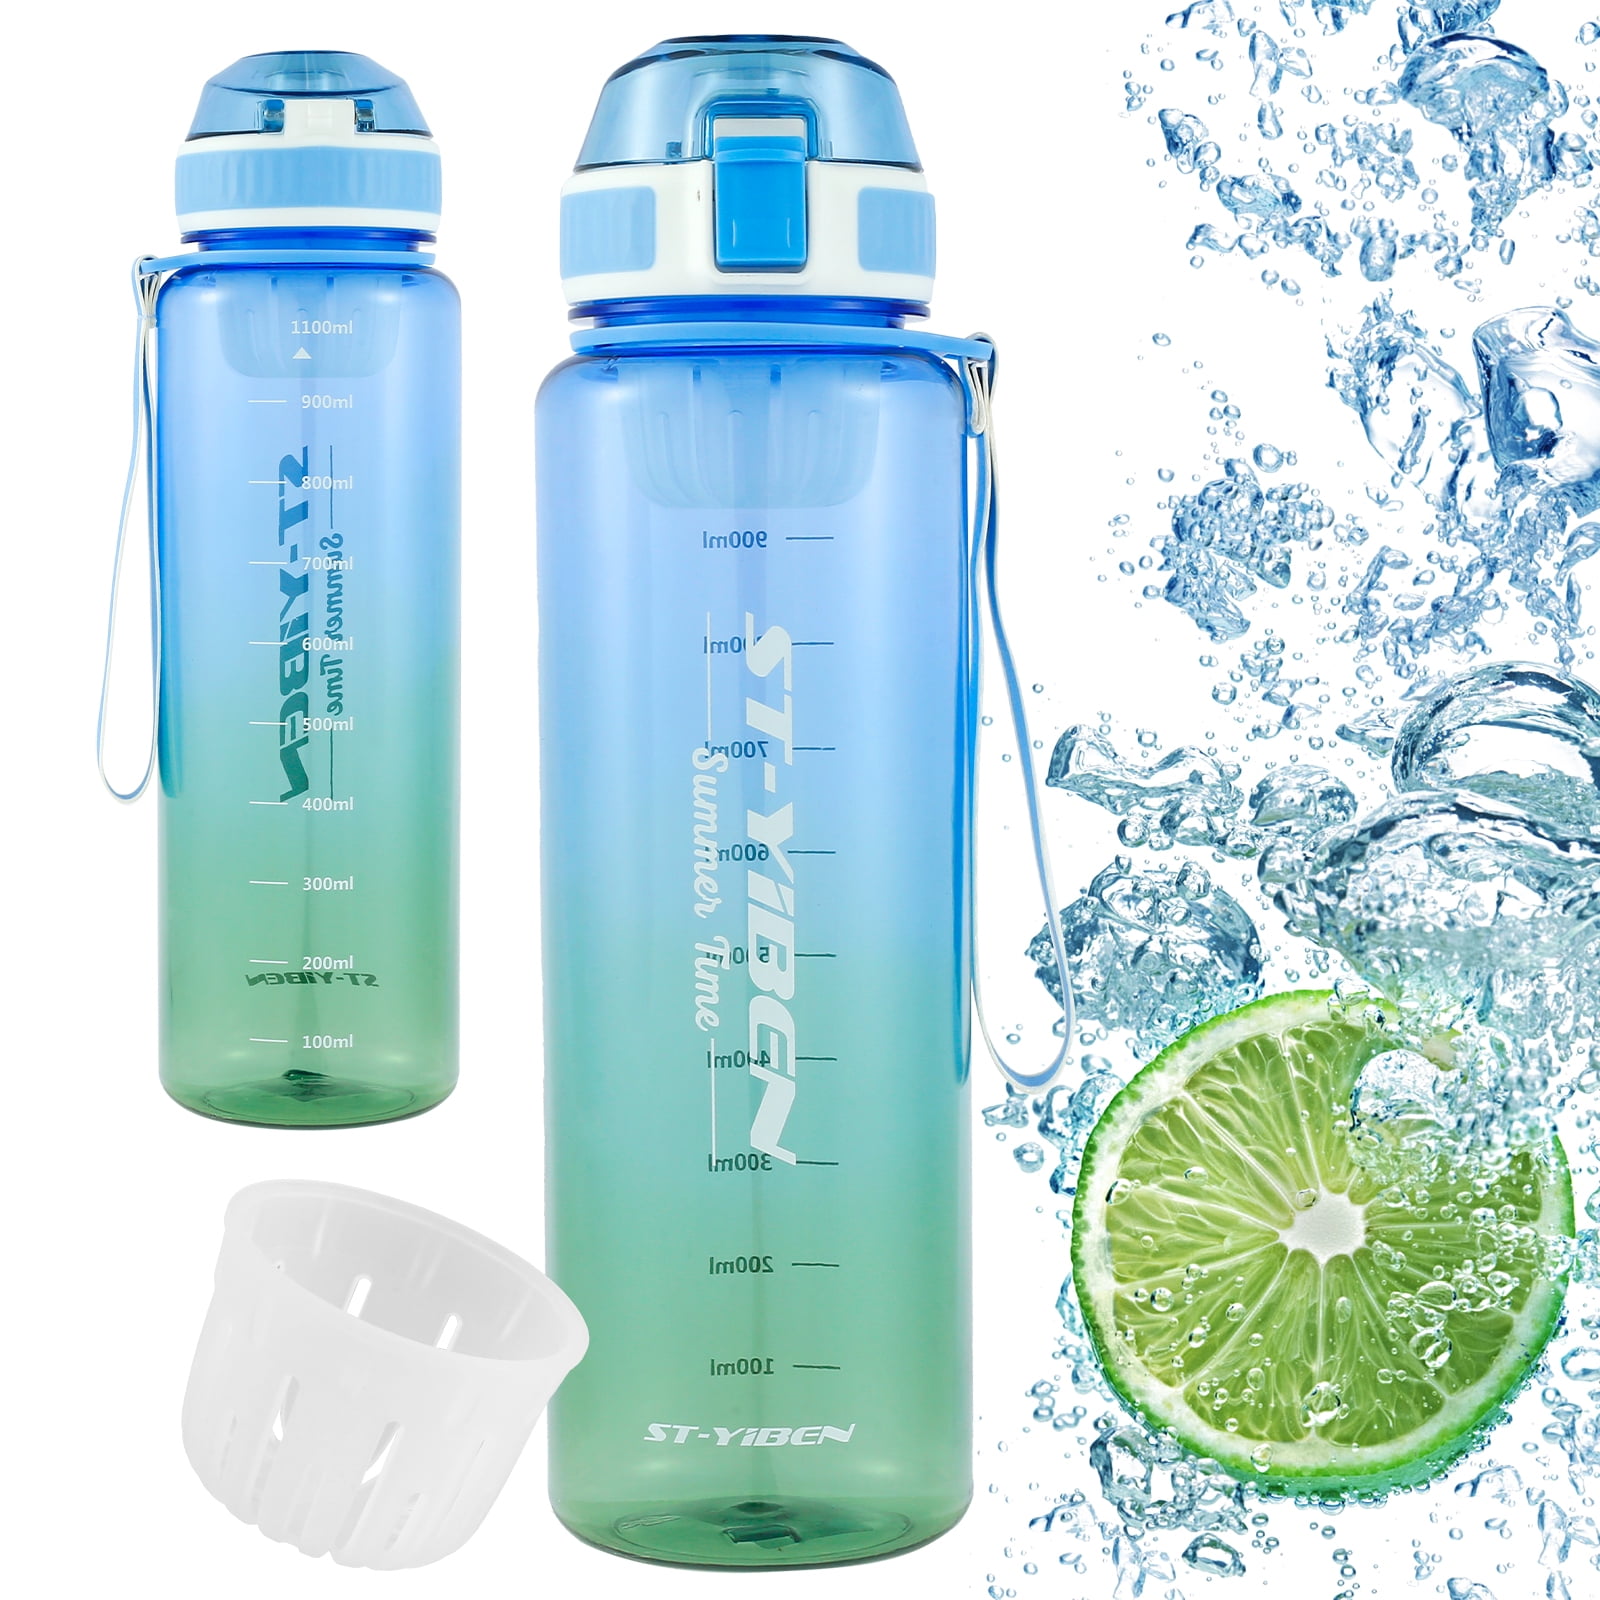 Buy H2go Water Lime online at